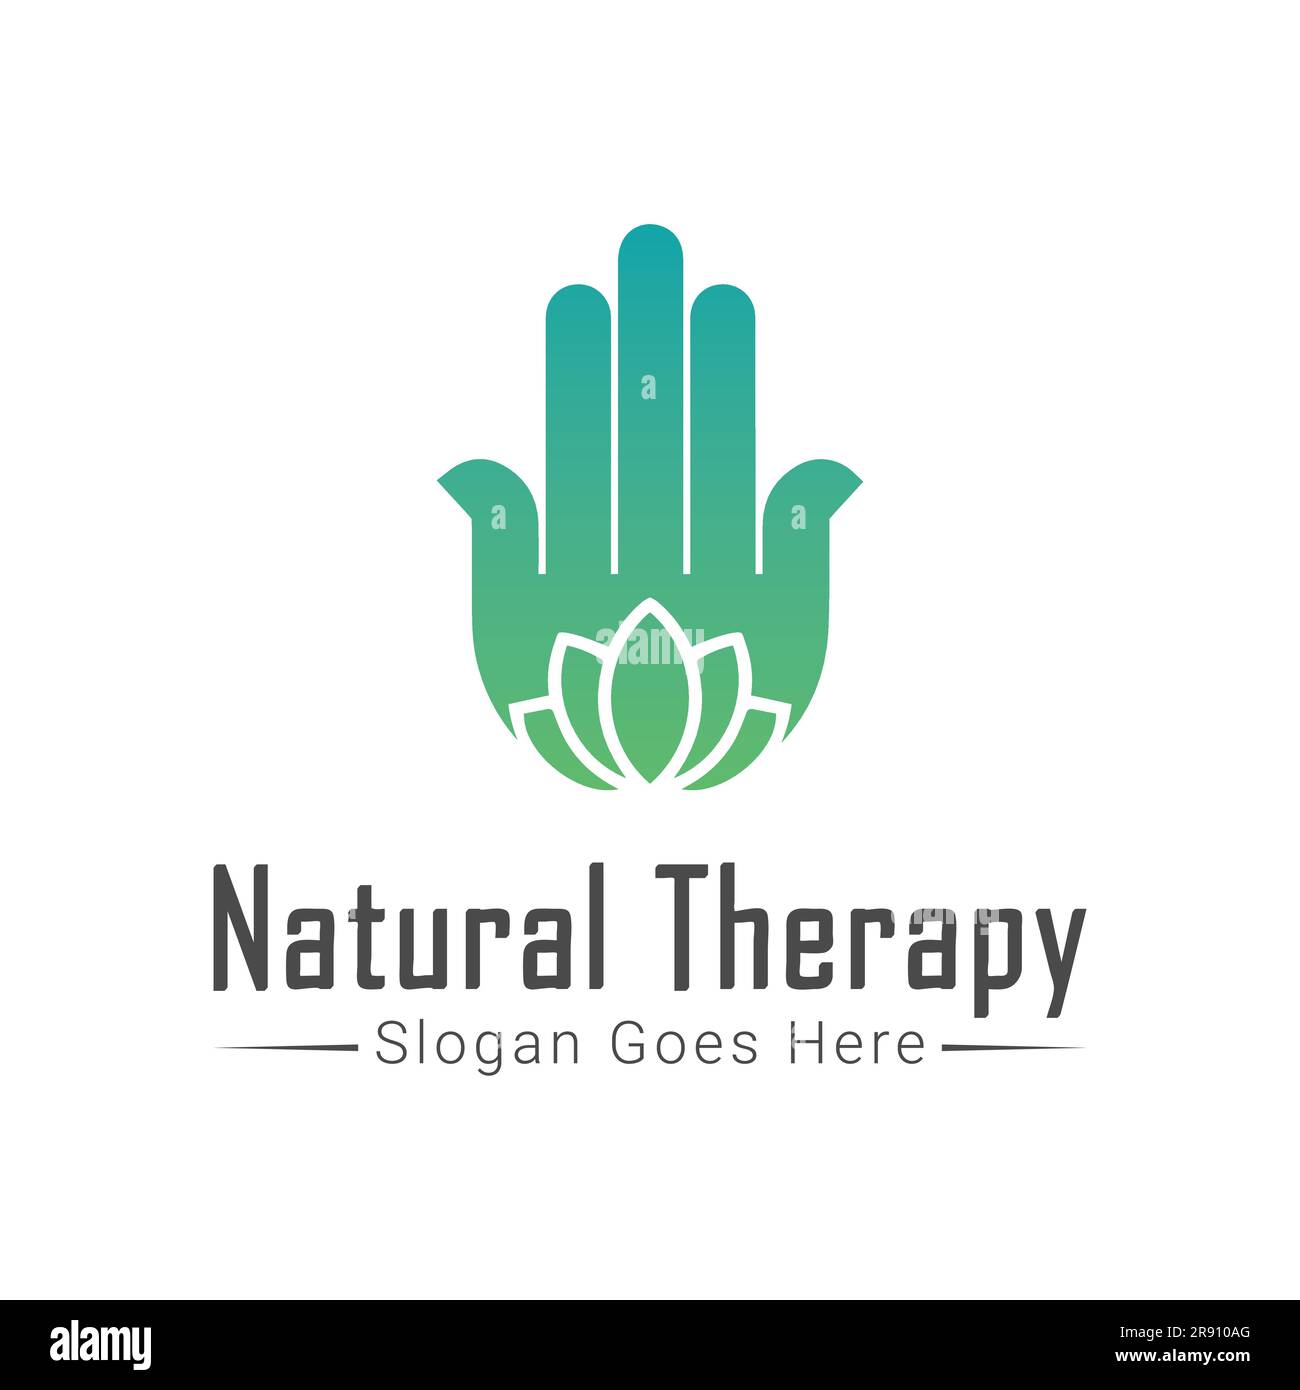 Natural Therapy Logo Design Psychotherapie Logotyp Wellness Entspannung Stock Vektor